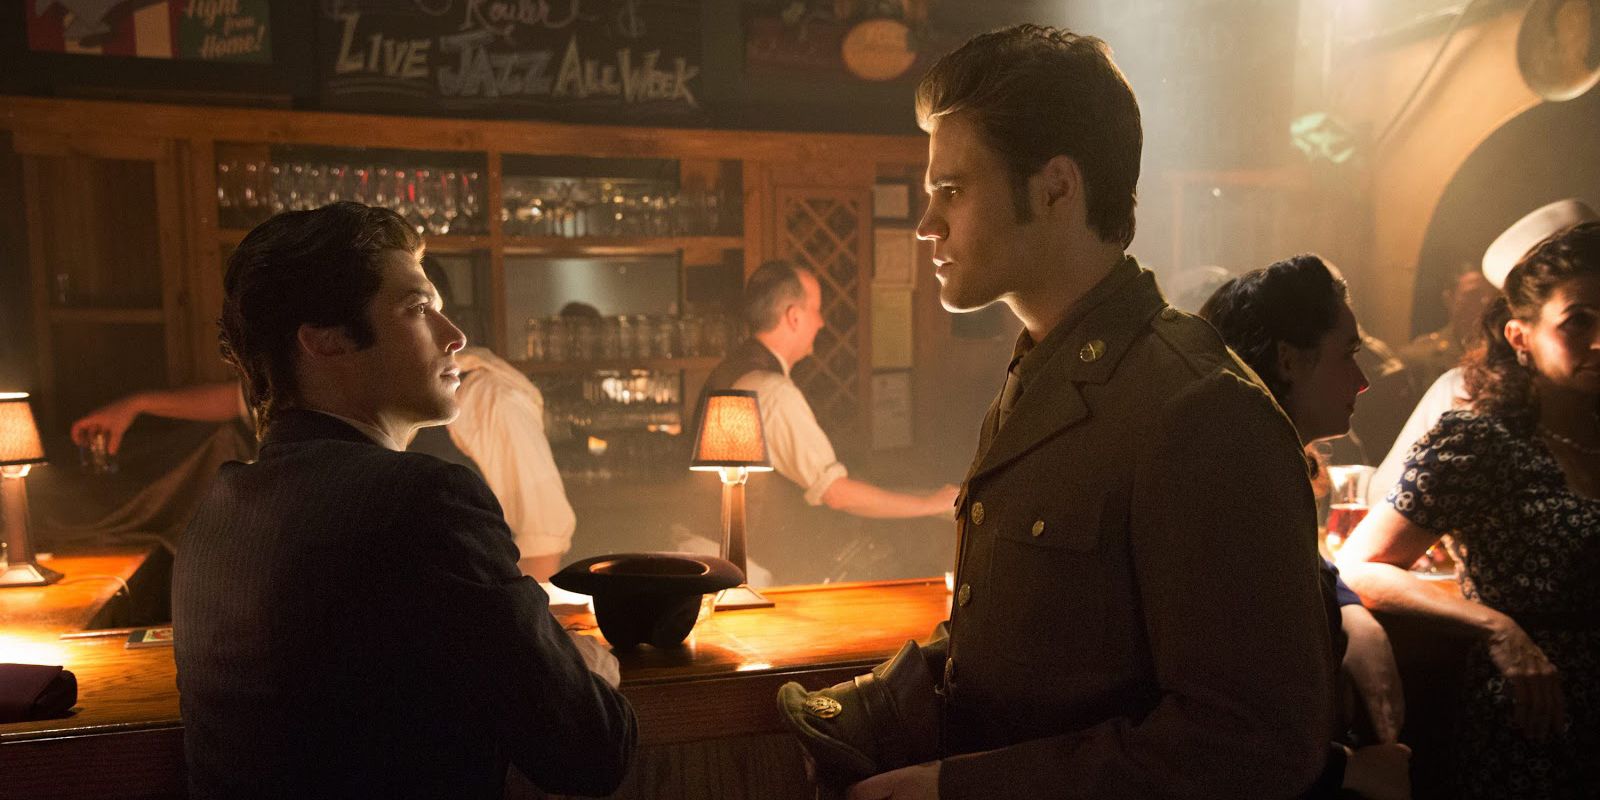 Stefan and Damon at a bar in the 1900s in The Vampire Diaries.